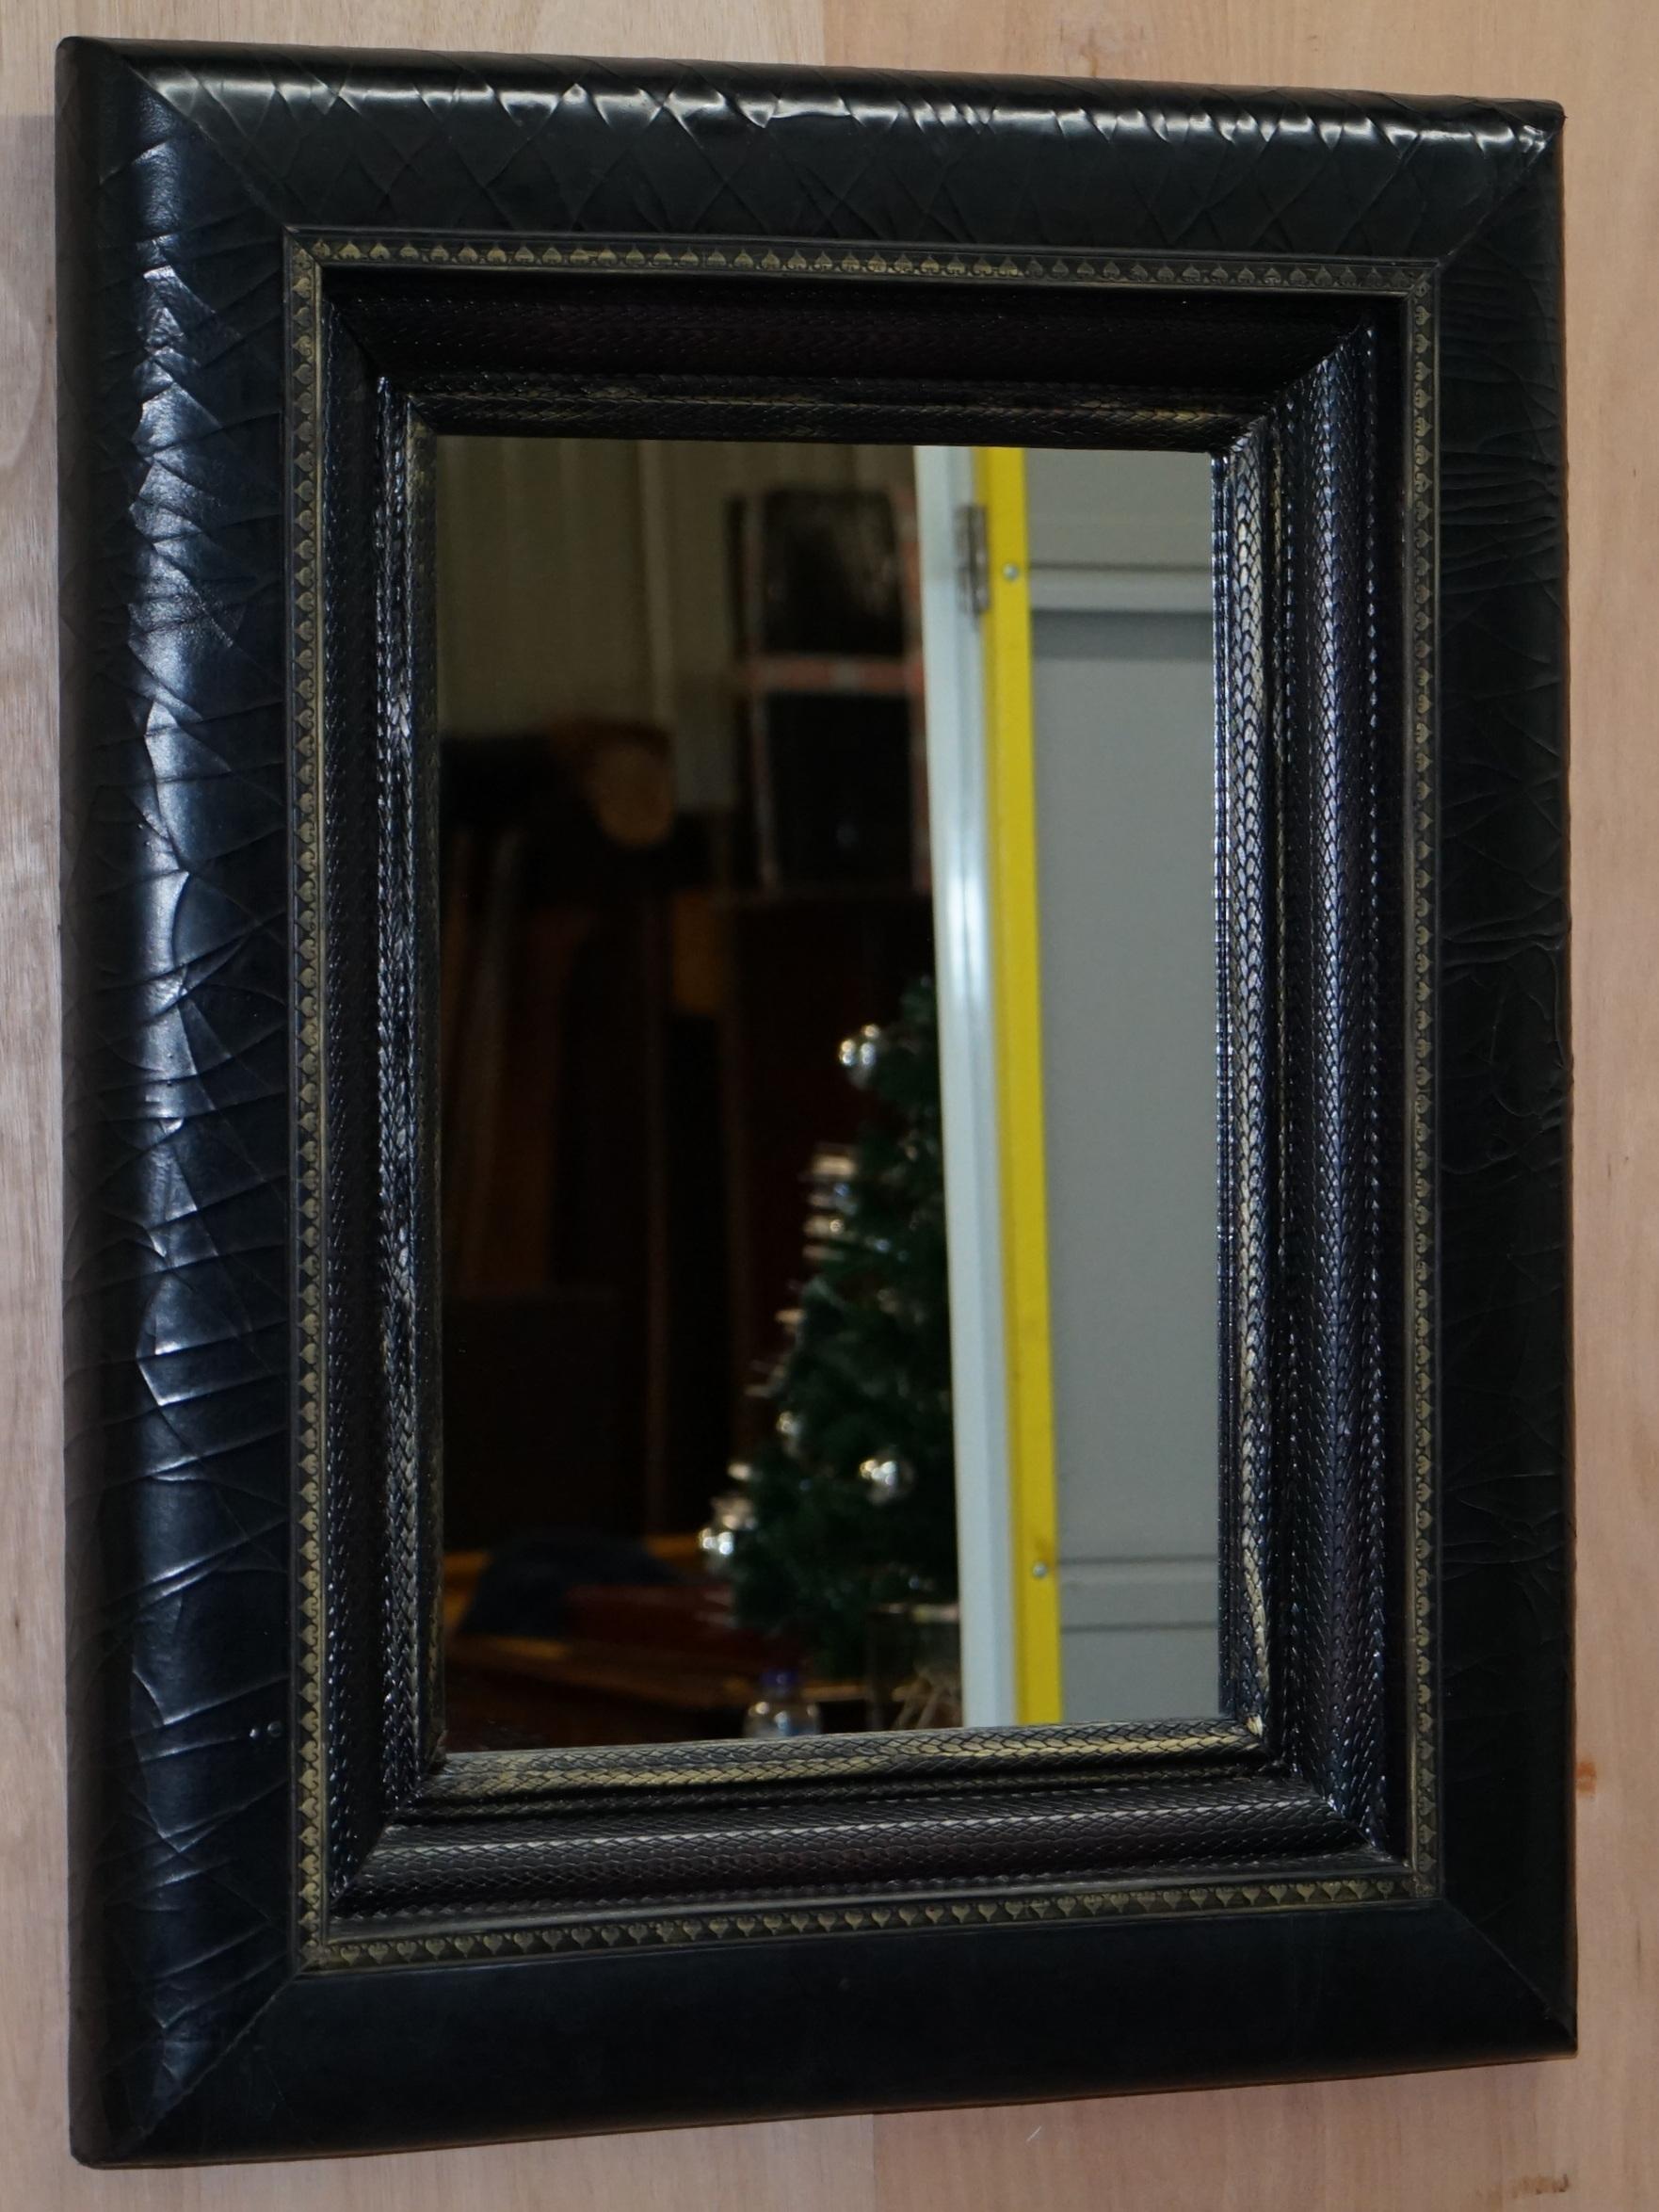 We are delighted to offer for sale this absolutely stunning Ralph Lauren black cracked leather mirror with snakeskin patina inner frame RRP £2200.

A very good looking and decorative wall mirror, I have two of these, the other is in brown leather